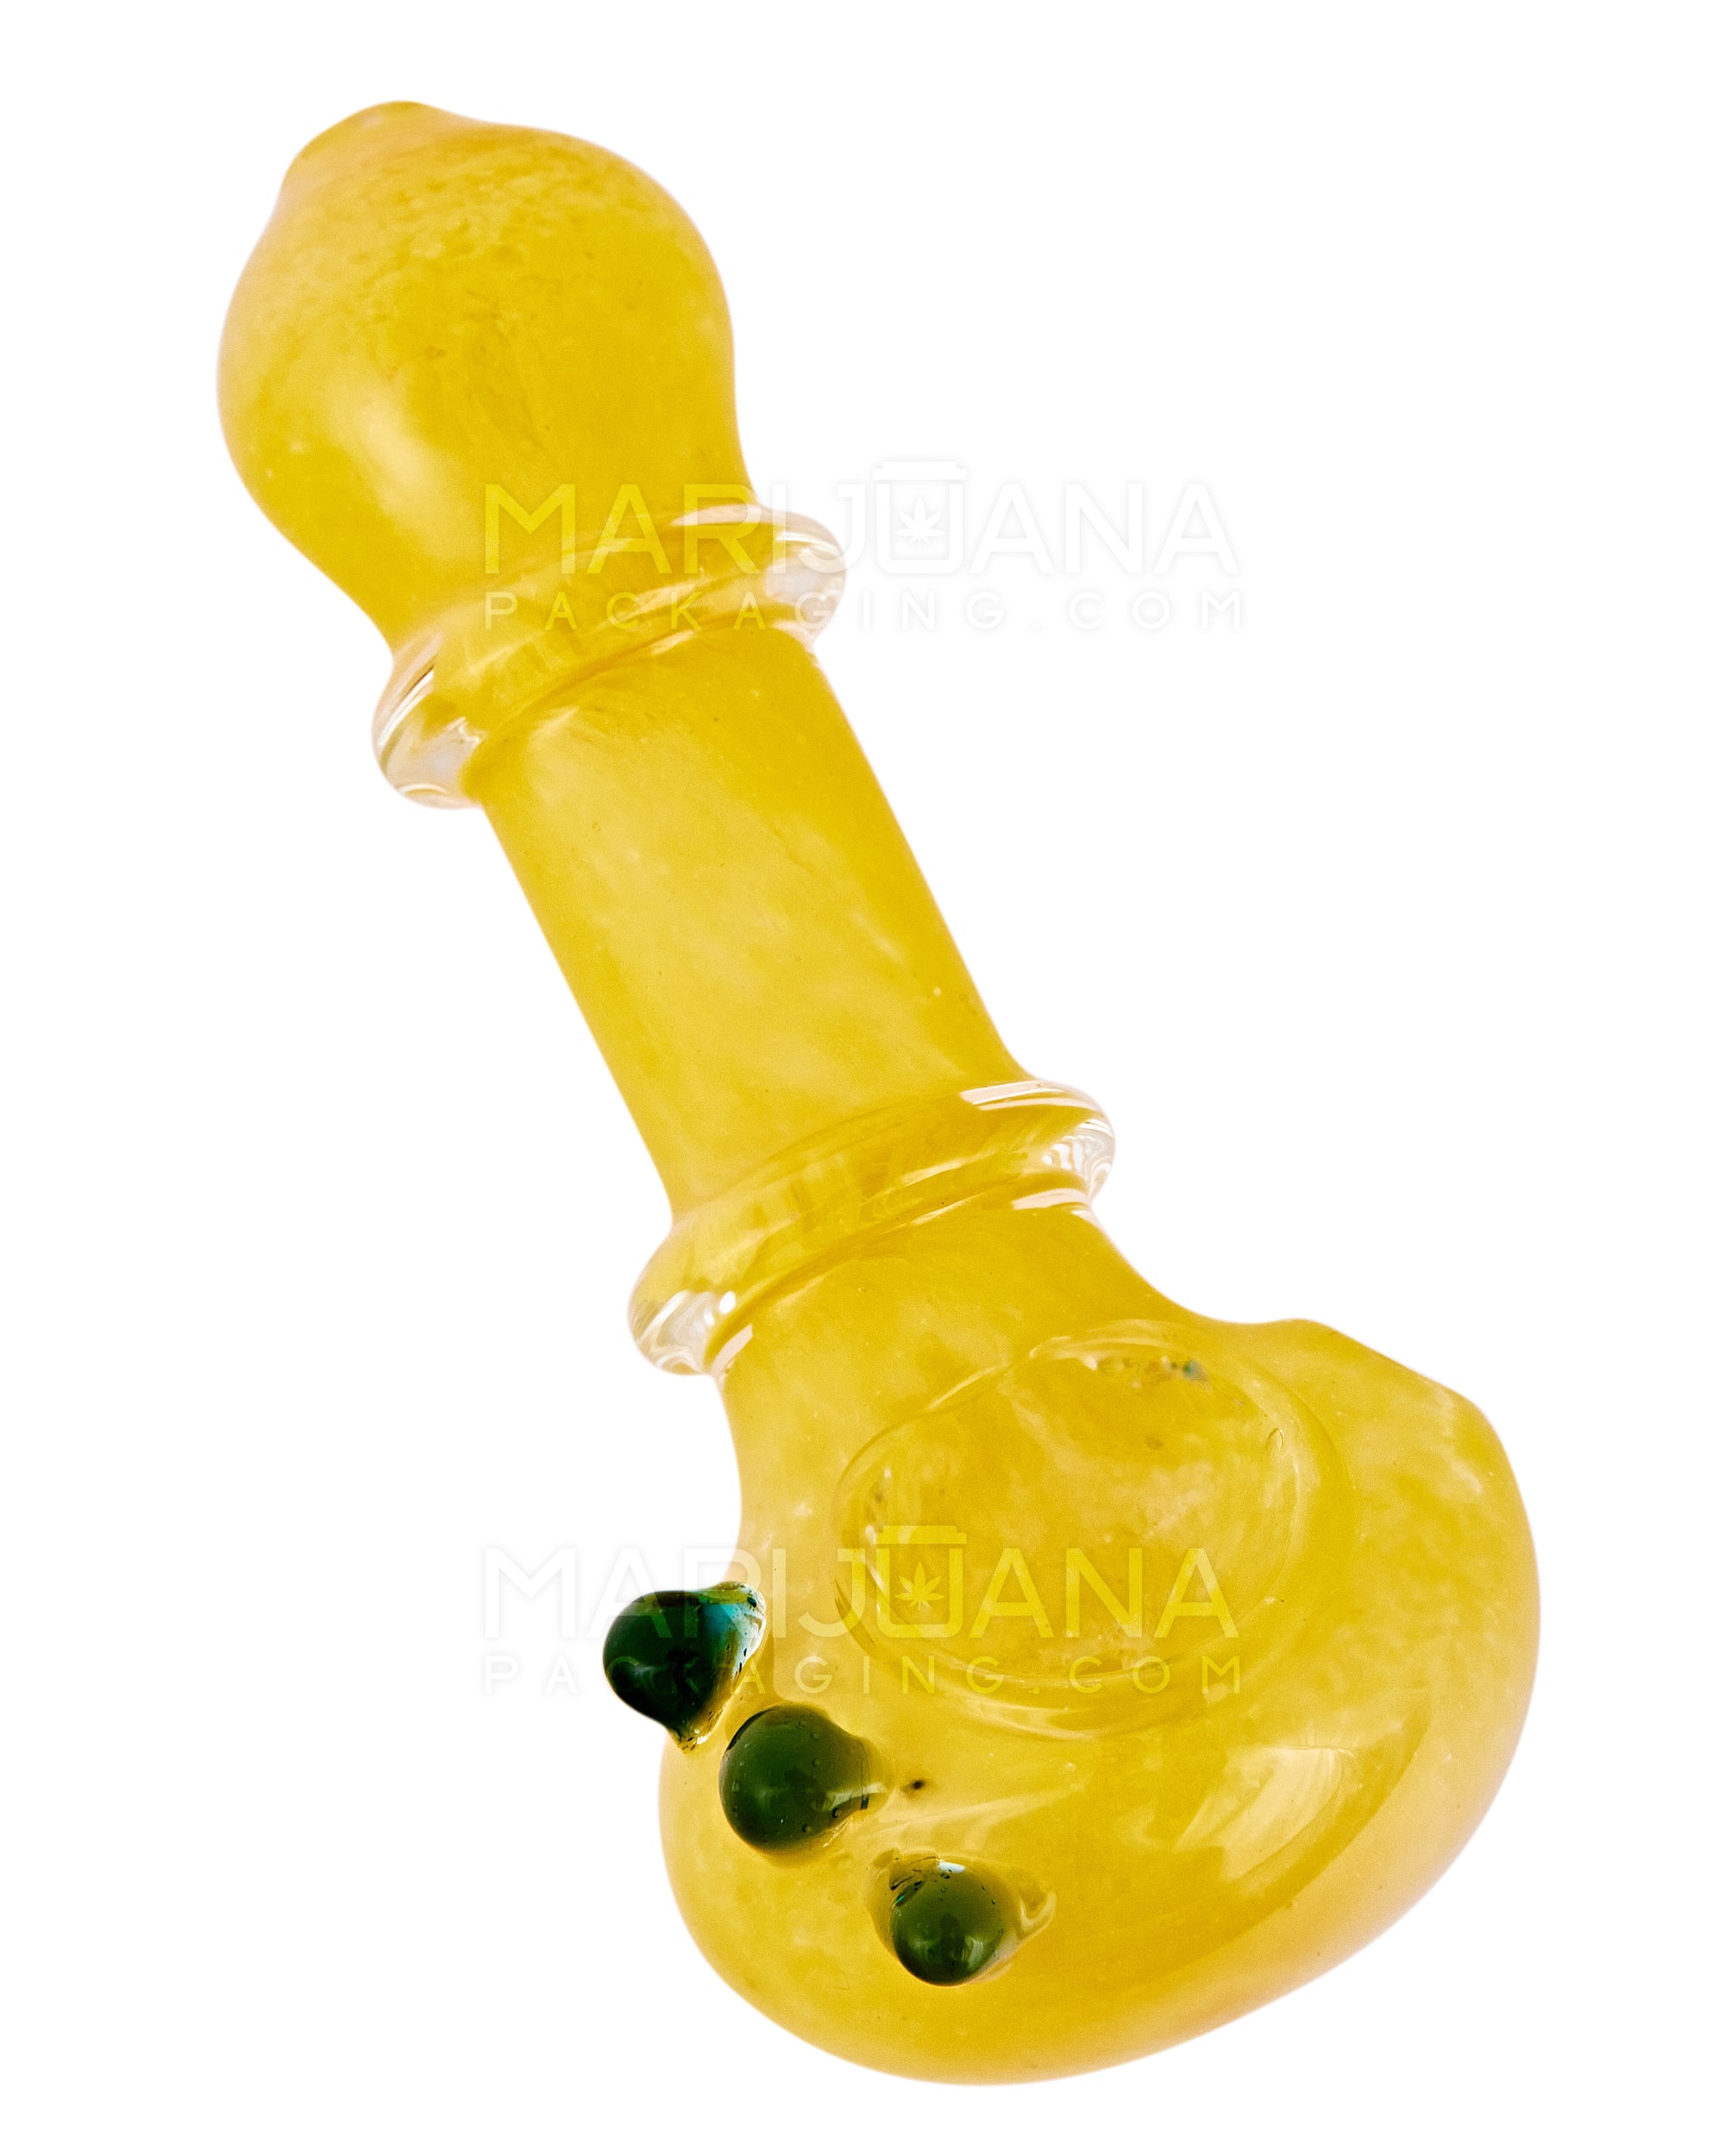 Frit Ringed Spoon Hand Pipe w/ Triple Knockers | 4.5in Long - Glass - Assorted - 6